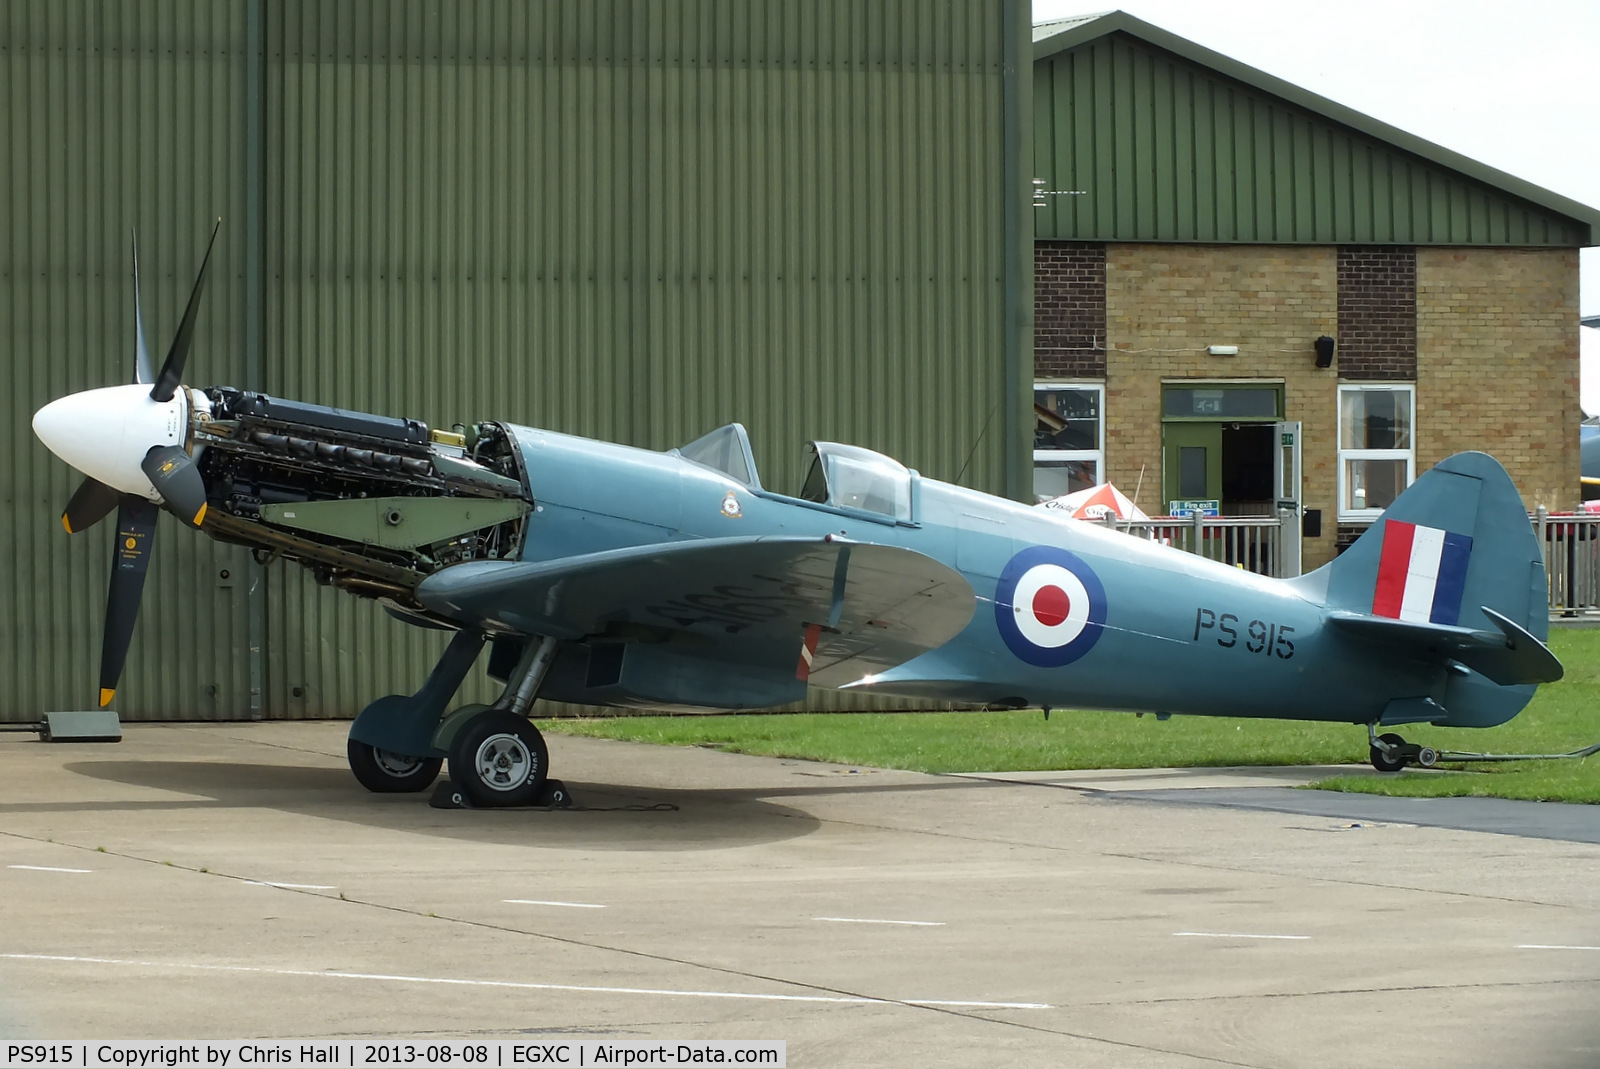 PS915, 1945 Supermarine 389 Spitfire PR.XIX C/N 6S/585121, PS915 currently wears the colour scheme and markings of PS888, a PRXIX of 81 Squadron based at Seletar in Singapore during the Malaya Campaign.